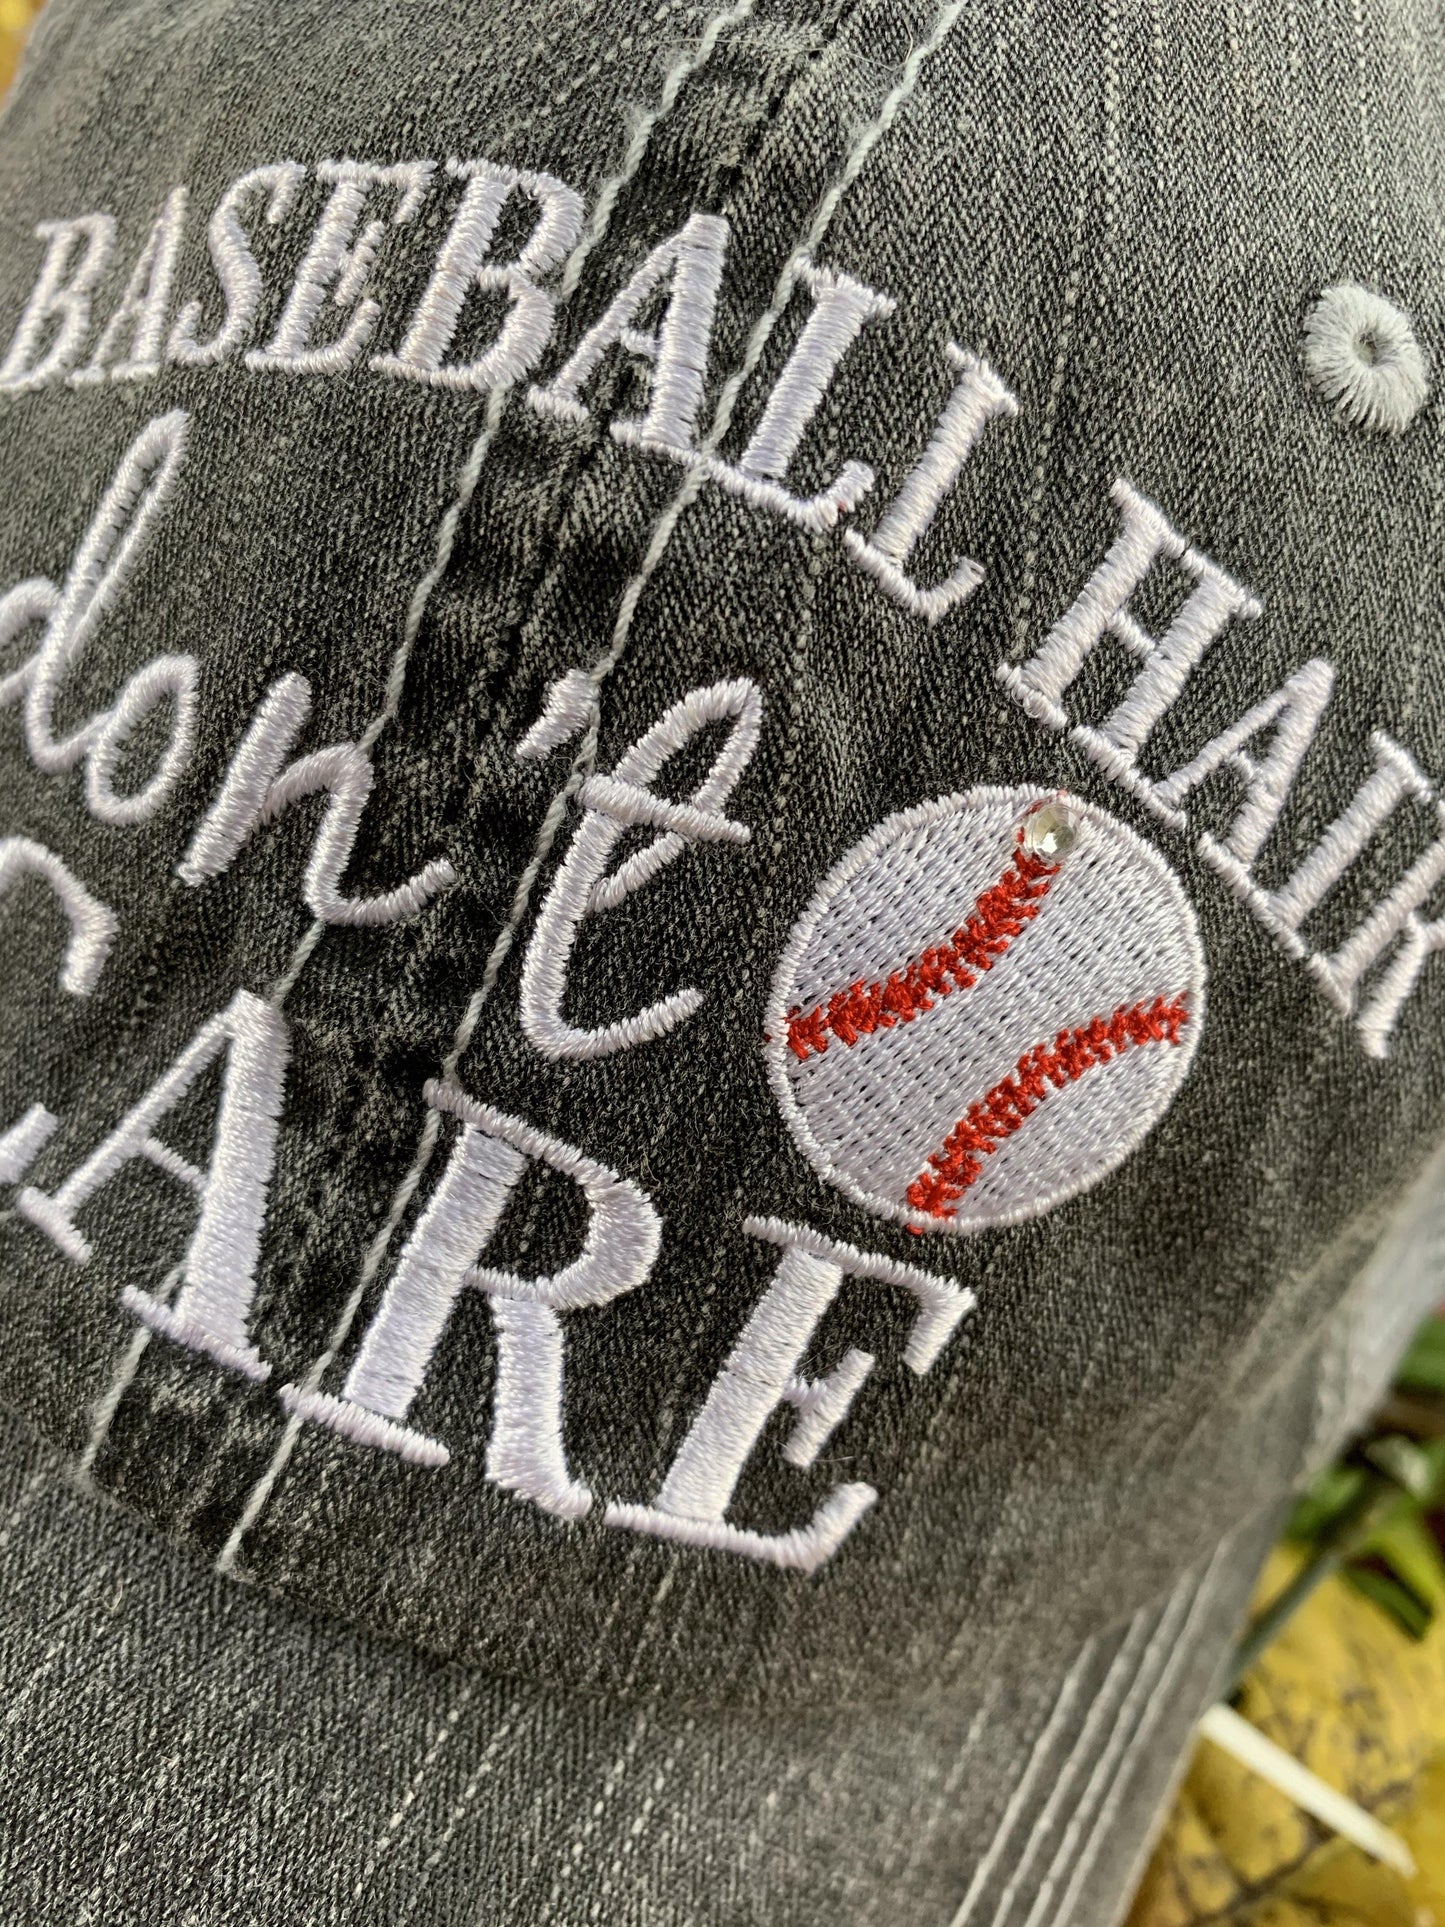 Baseball hat Baseball hair don’t care Embroidered gray distressed trucker cap - Stacy's Pink Martini Boutique